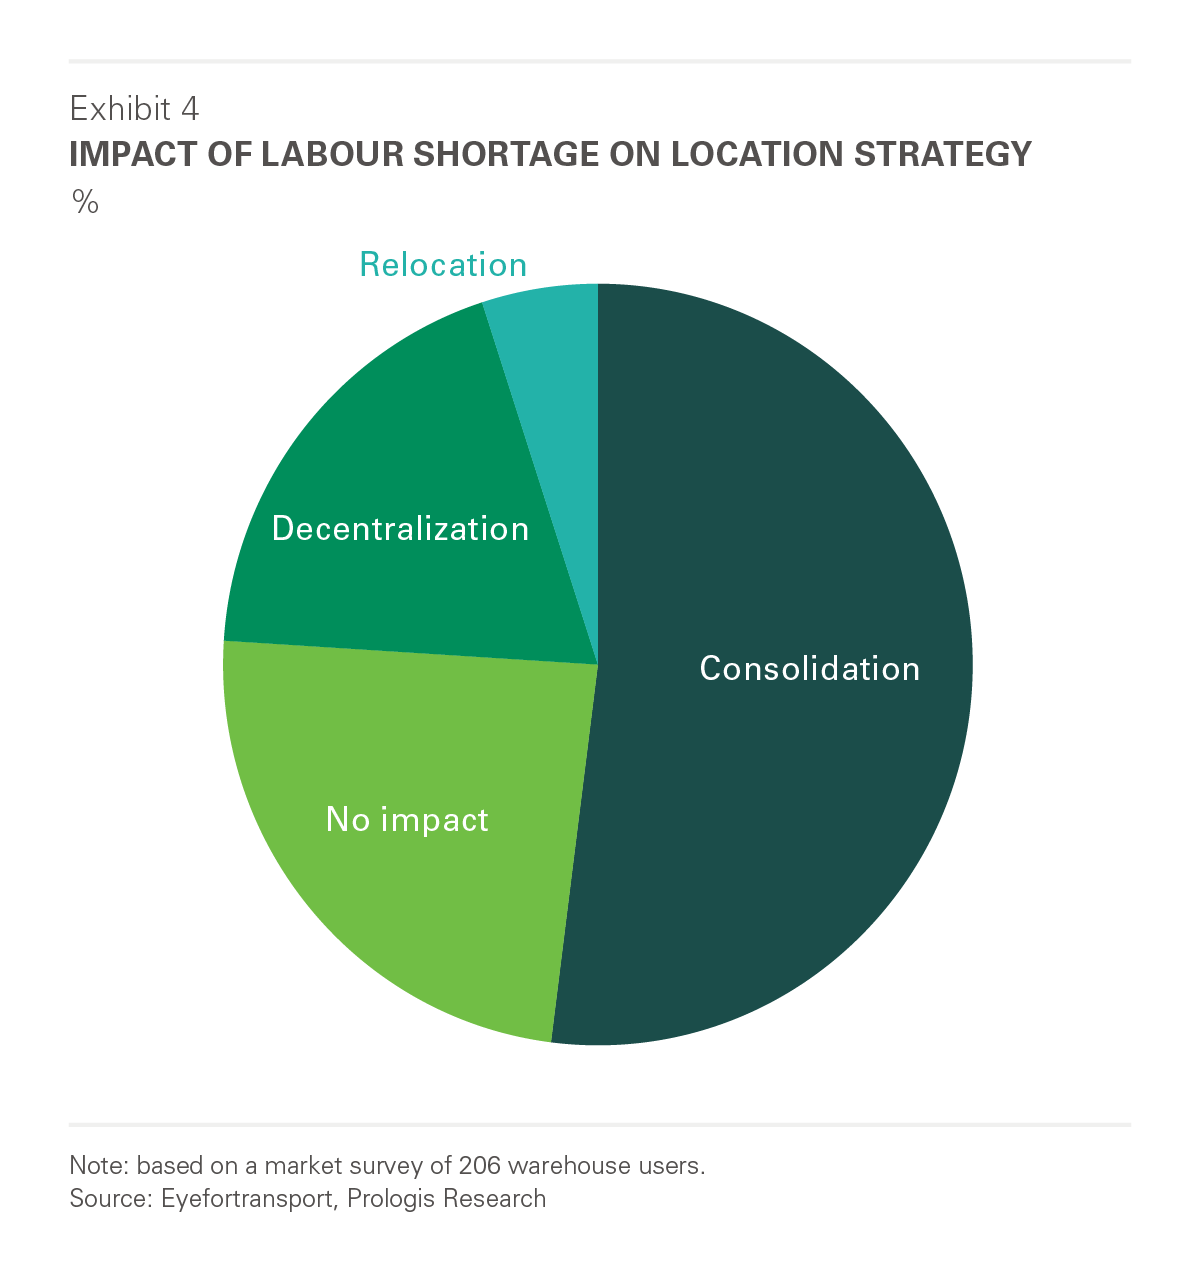 Impact of Labour Shortage on Location Strategy